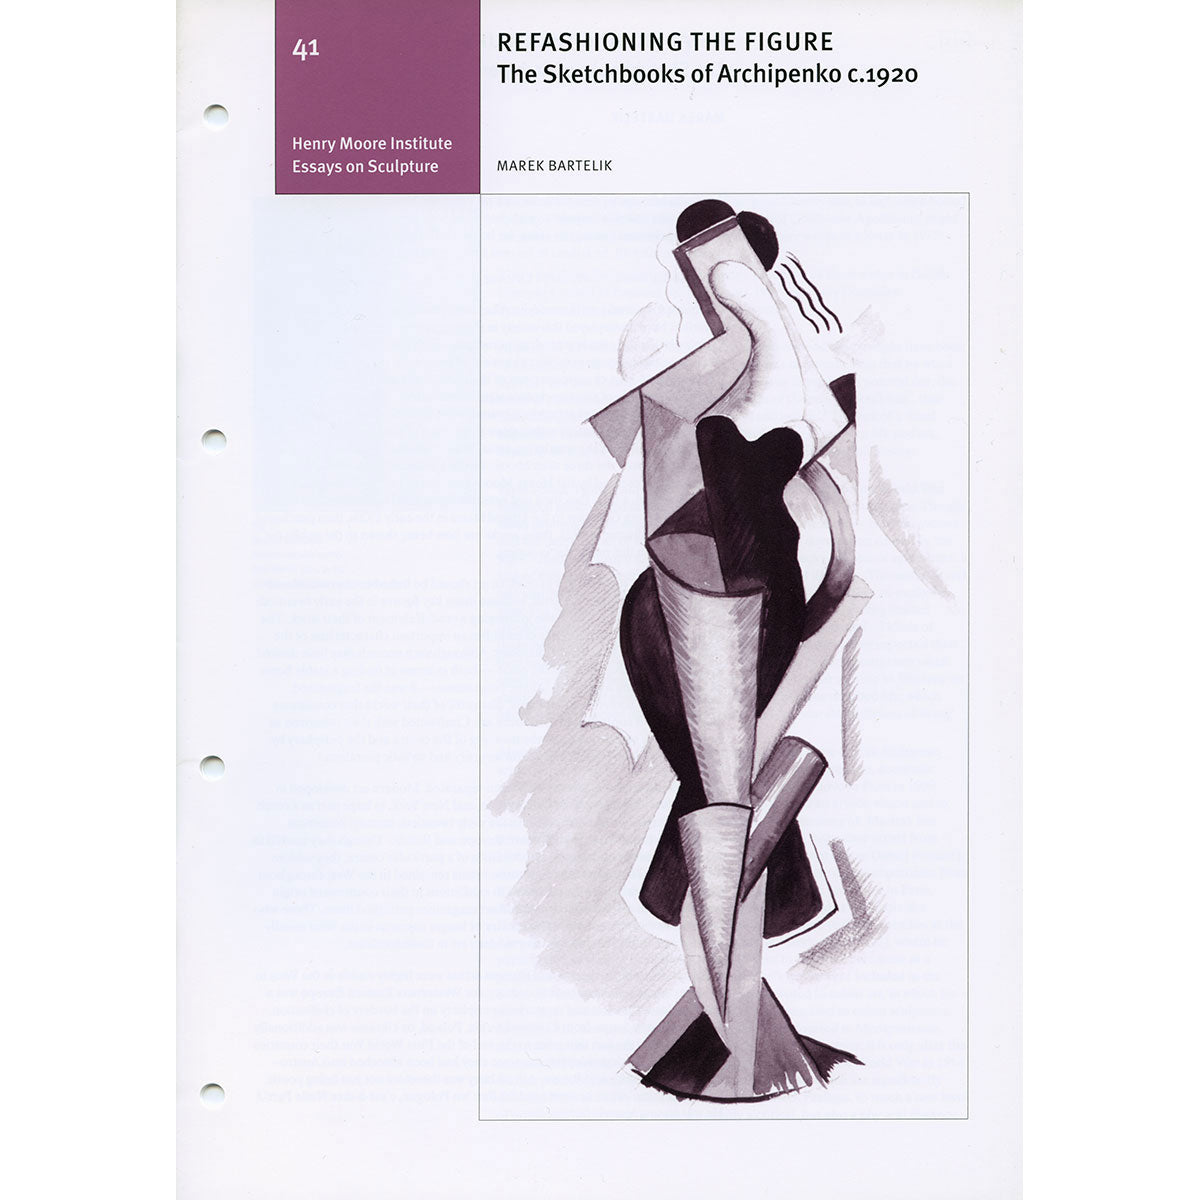 Refashioning the Figure: The sketchbooks of Archipenko c.1920 (No. 41)